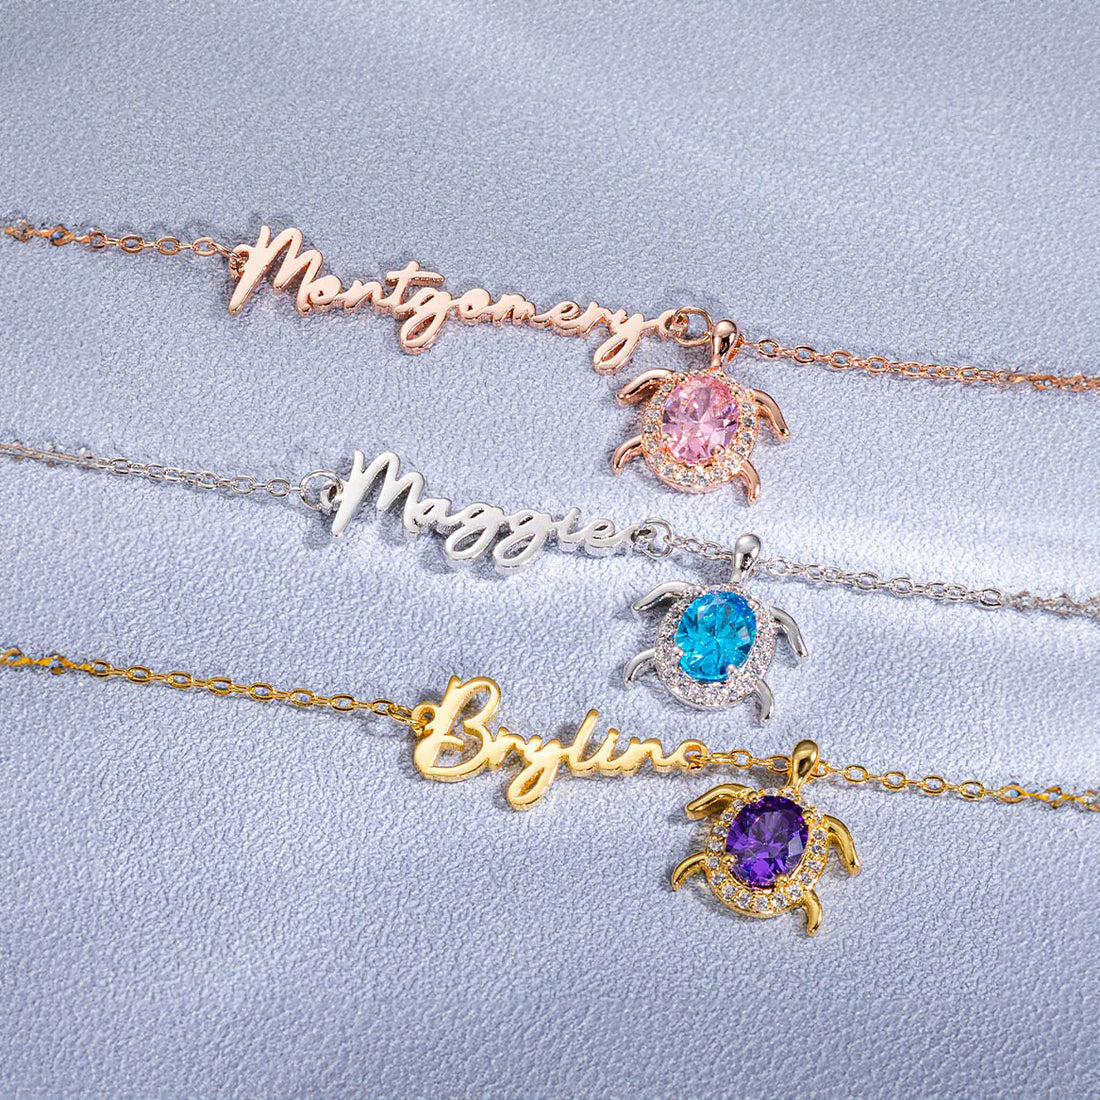 Name Necklace with Birthstone Turtle